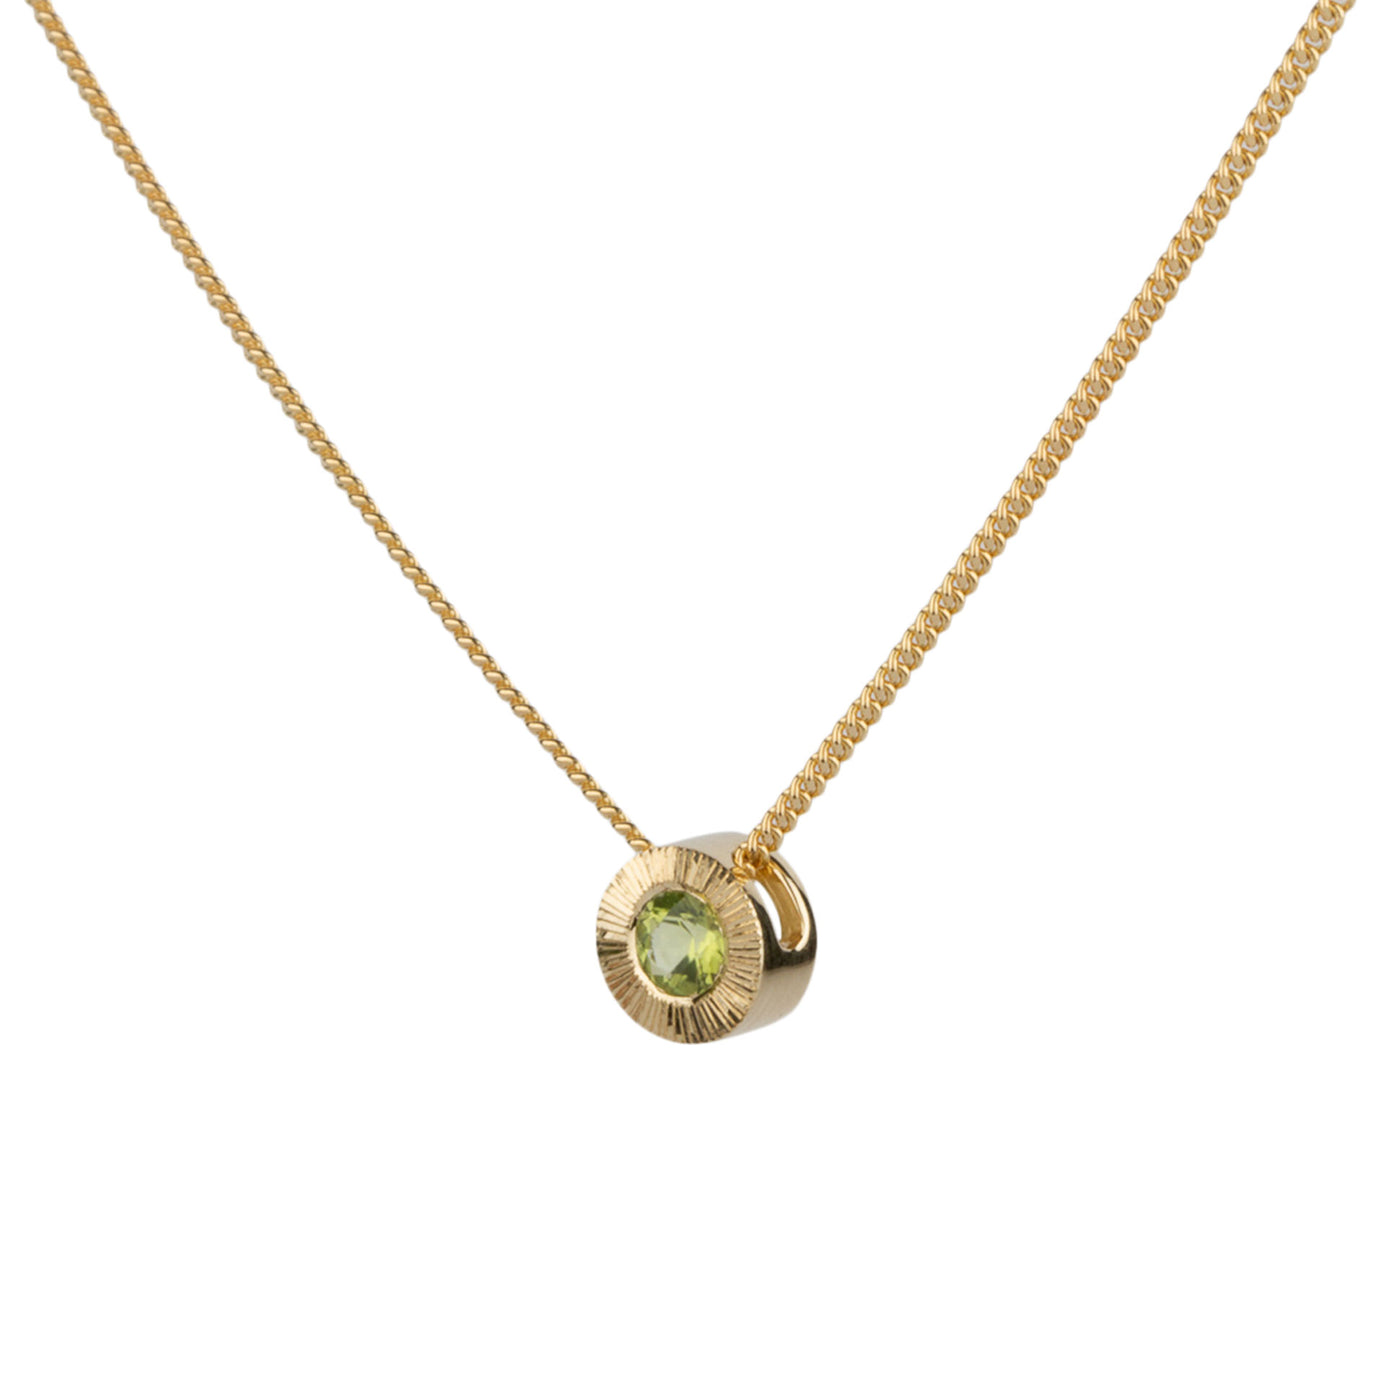 August Birthstone Aurora slide necklace with peridot in gold